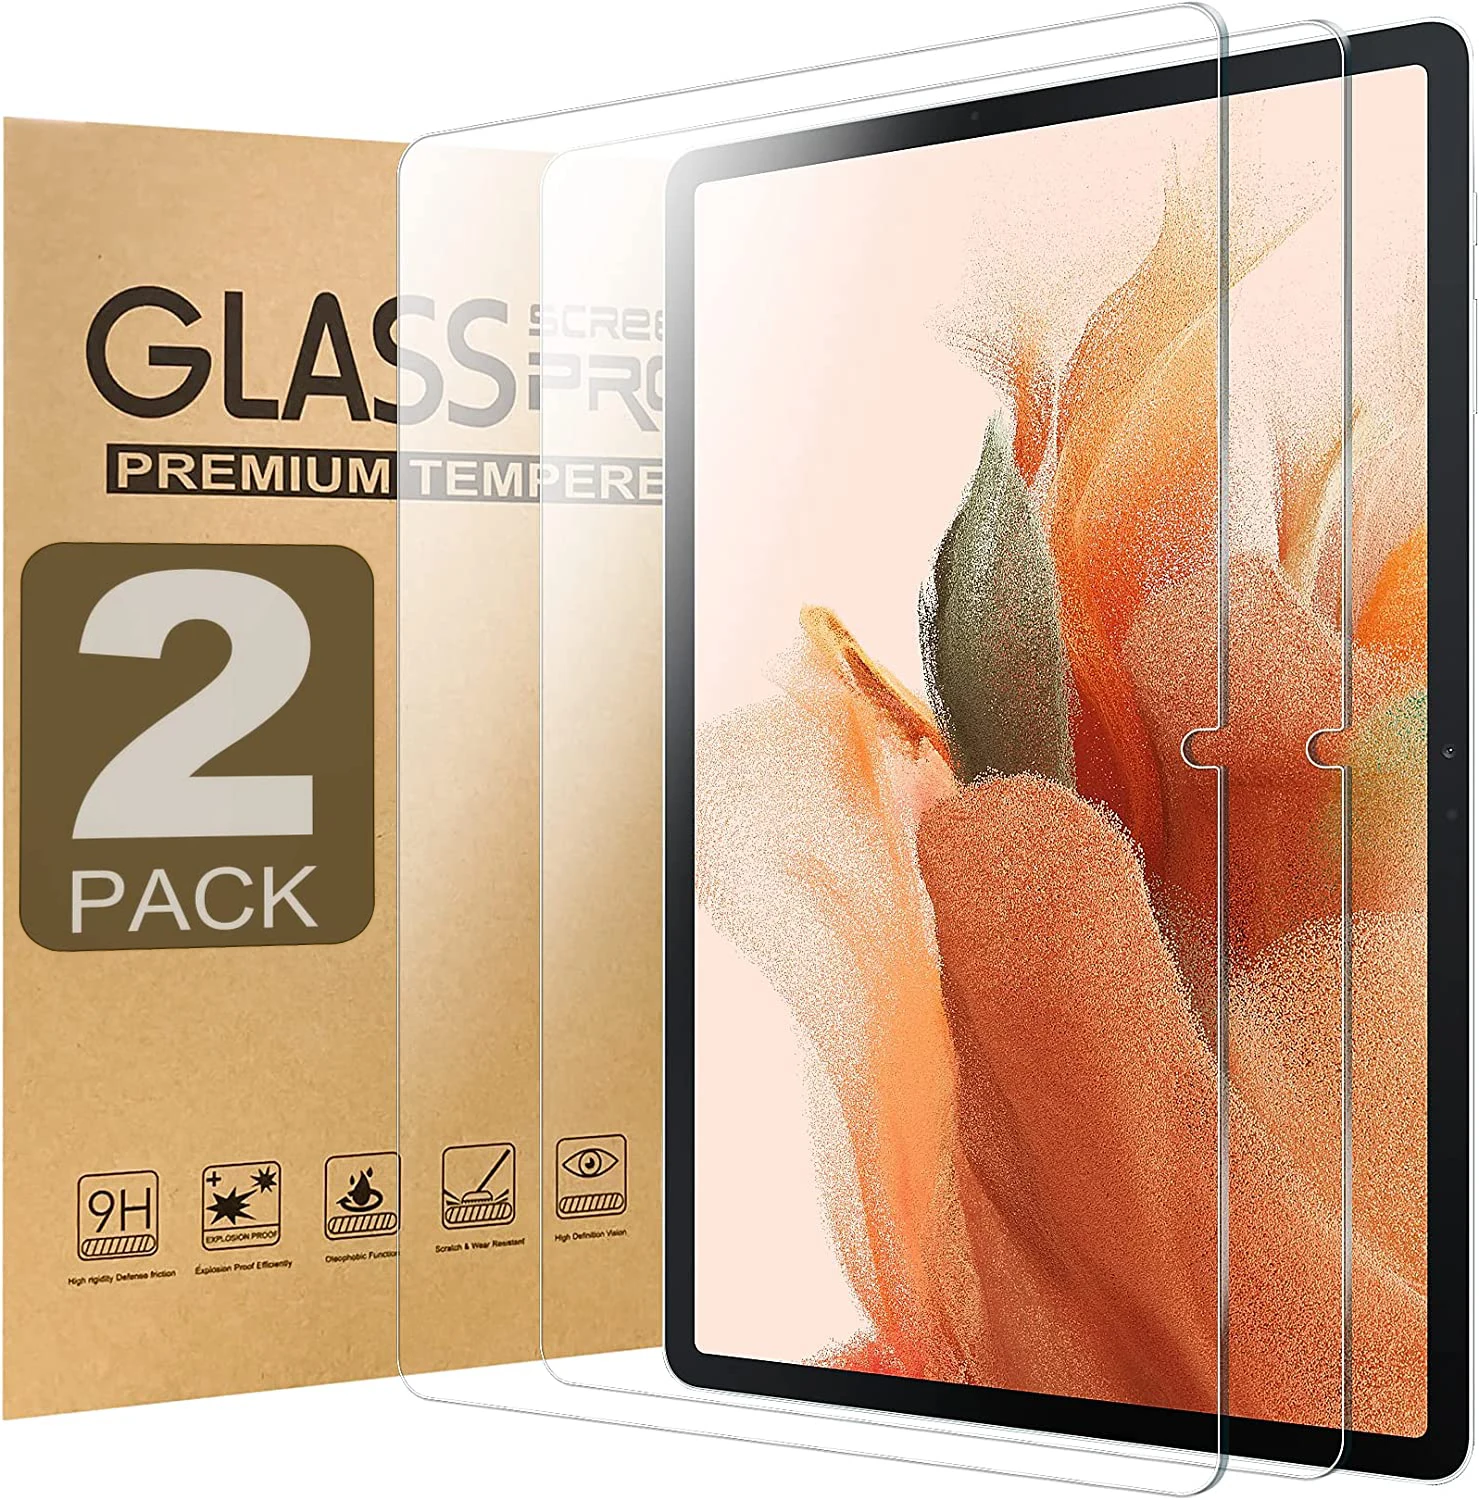 2pcs Screen Protector Tempered Glass For Samsung Galaxy S7 FE 12.4'' 2021 s7 fe SM-T730 SM-T735 SM-T736B HD Clear Tablet Film （2 packs）tempered glass for samsung galaxy tab s7 fe plus 2021 12 4 sm t730 t736b t970 t976b full coverage screen protector film